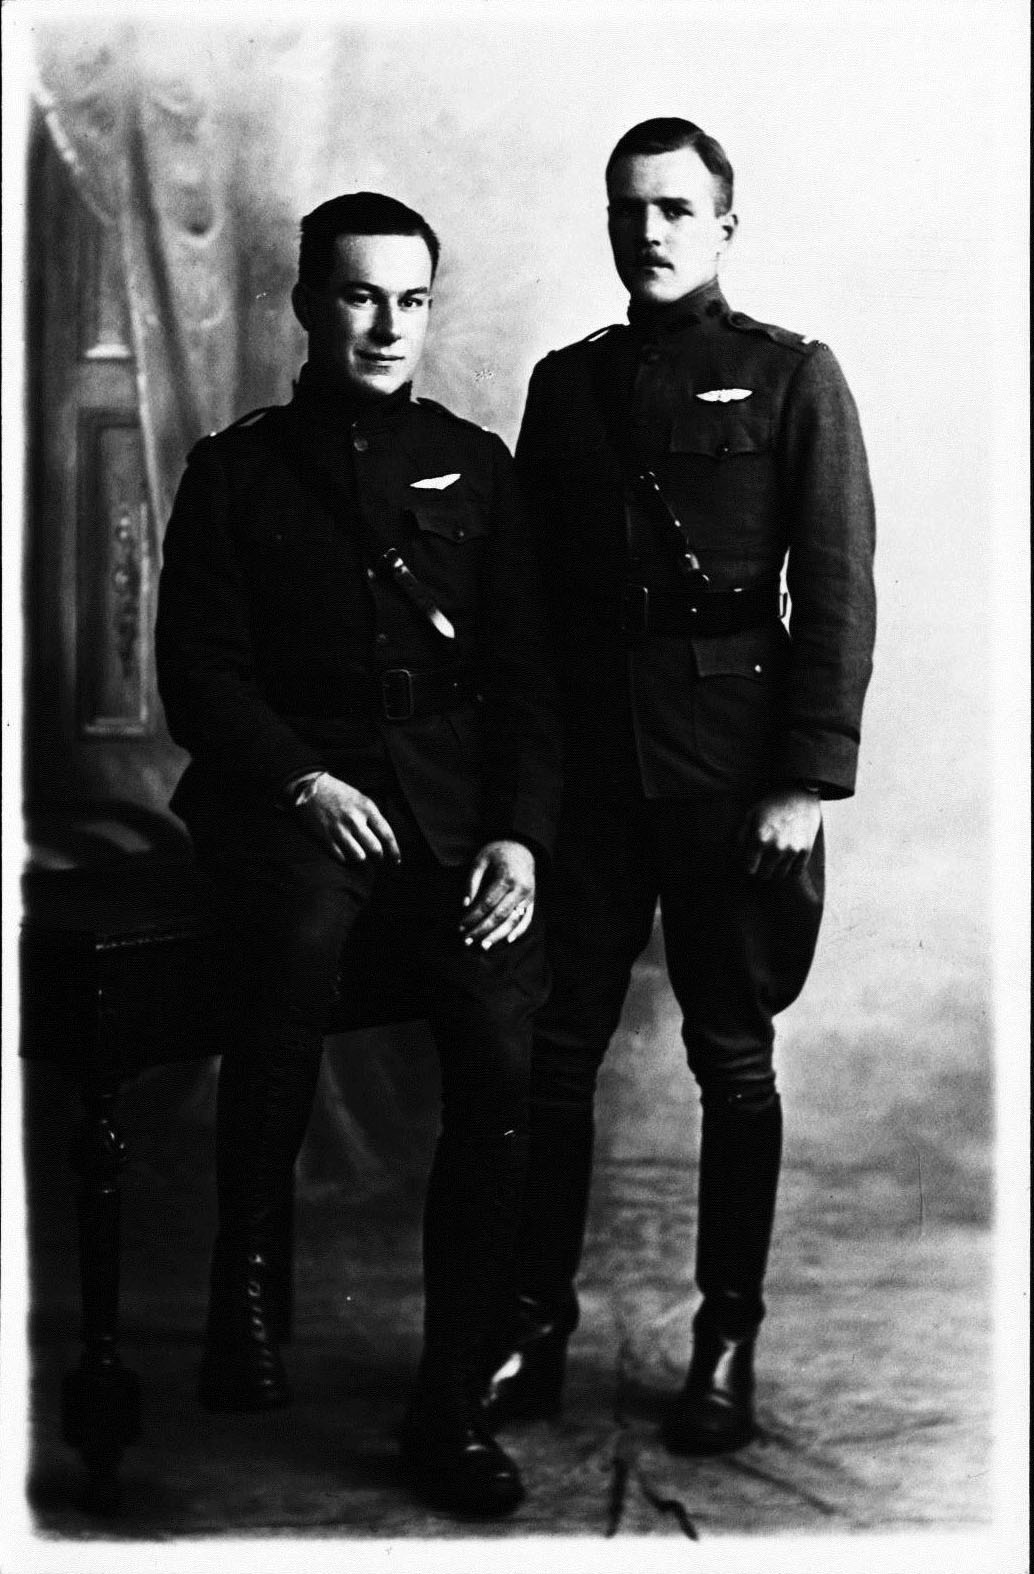 A formally photo of two men in uniform with pilot's wings. Shaw is recognizable on the left, Deetjen on the right.